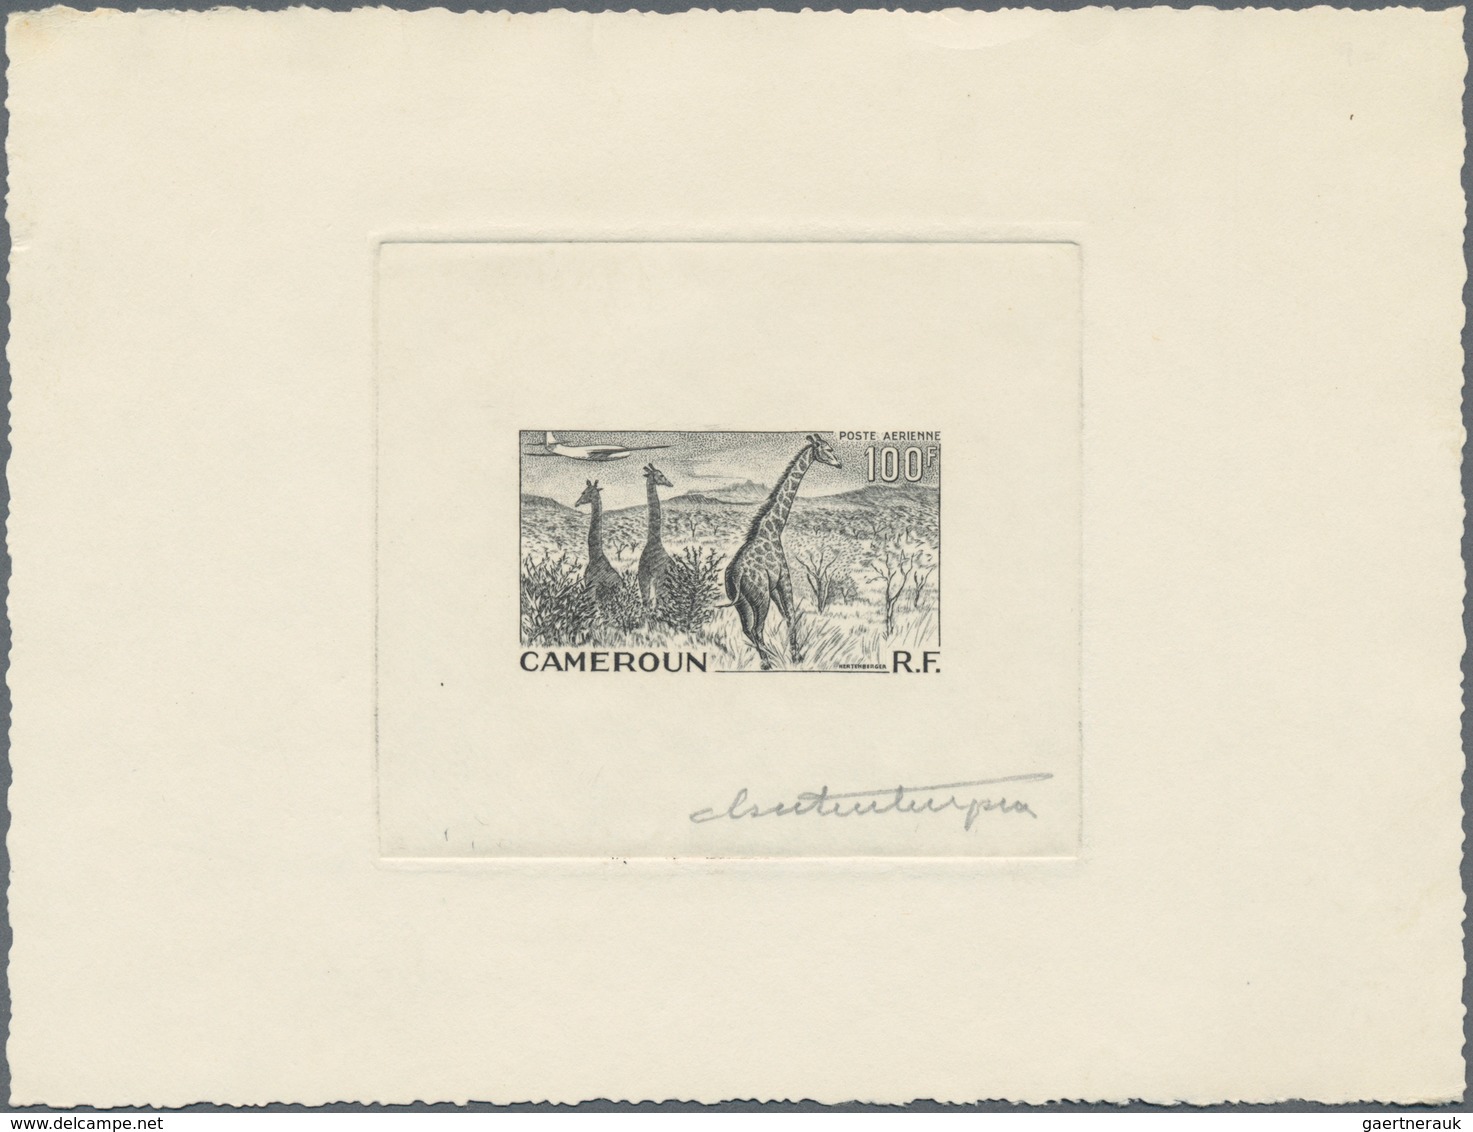 Thematik: Tiere, Fauna / animals, fauna: 1955, Cameroon. Lot of 4 Epreuves d'artiste signée for the